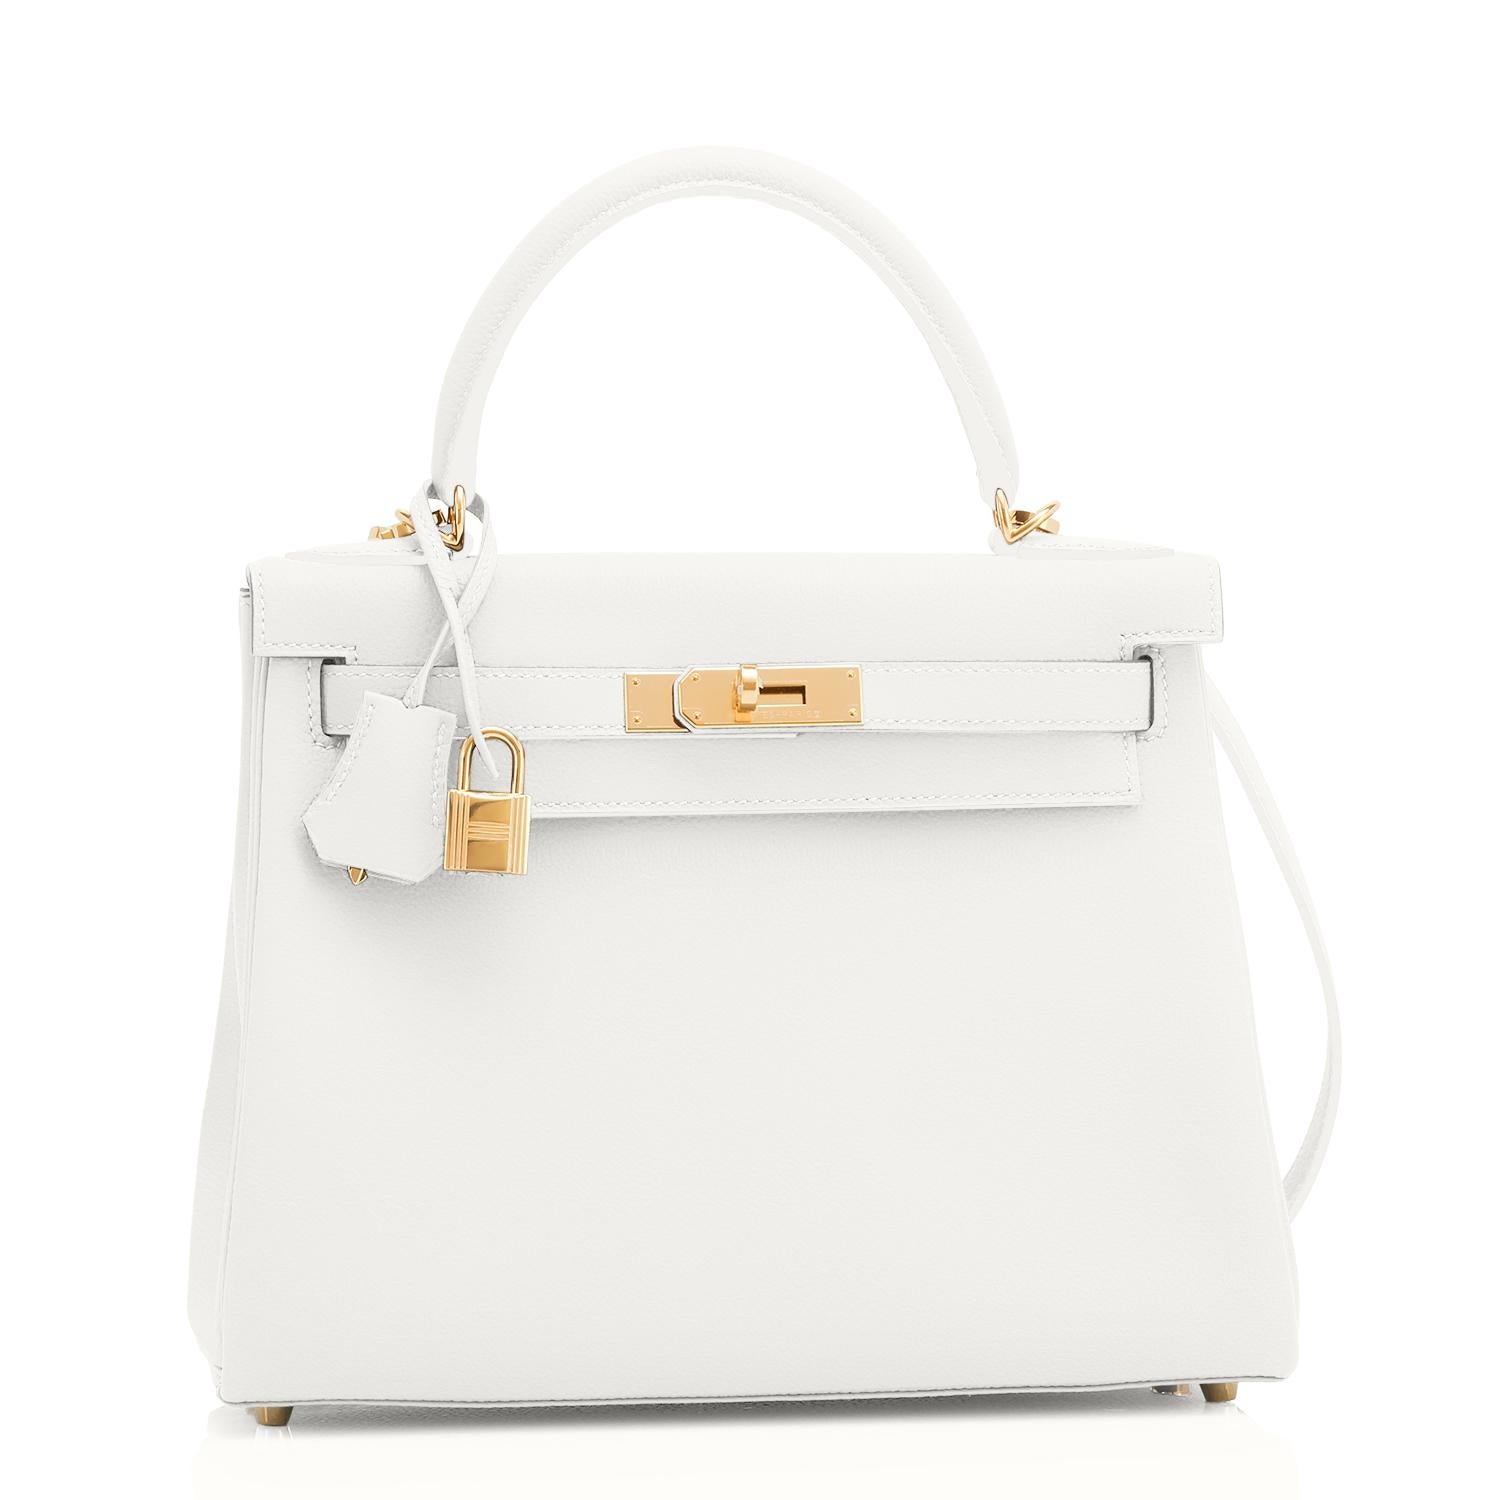 Guaranteed Authentic Hermes Kelly 28 Horseshoe Stamp White and Gris Asphalte Kelly VIP Y Stamp, 2020
Uber chic! World Exclusive! A spectacular bicolor combination custom made for a VIP.
Just purchased at Hermes store; bag bears new interior 2020 Y